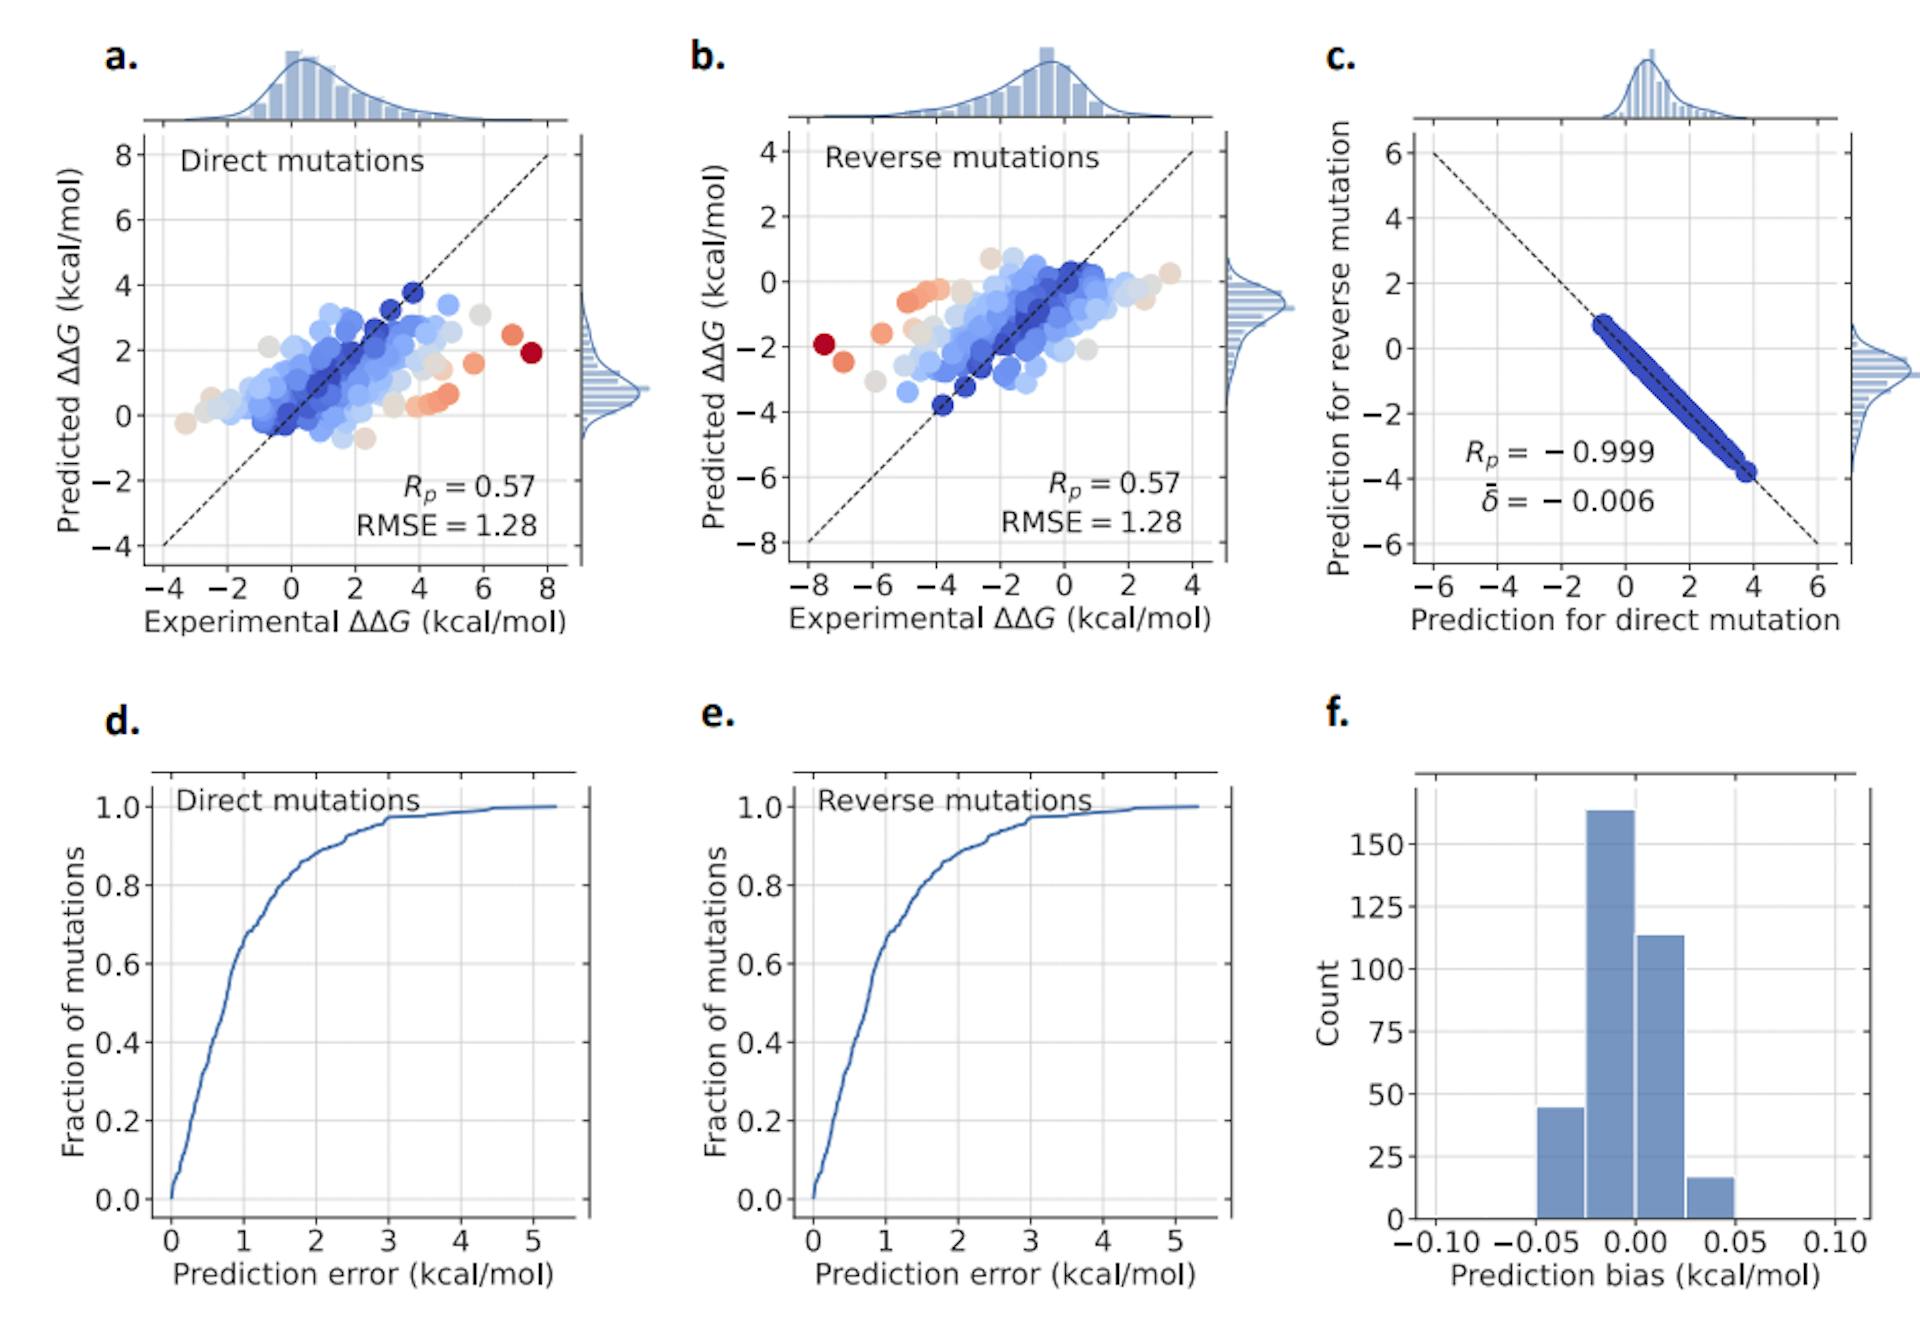 Figure 3: Results of our GGL-PPI2 model for Ssym dataset. In (a), direct mutations are plotted, while (b)presents the results for reverse mutations. The color spectrum, ranging from blue to red, represents the corresponding prediction accuracy—where blue signifies higher accuracy and red indicates lower accuracy. A